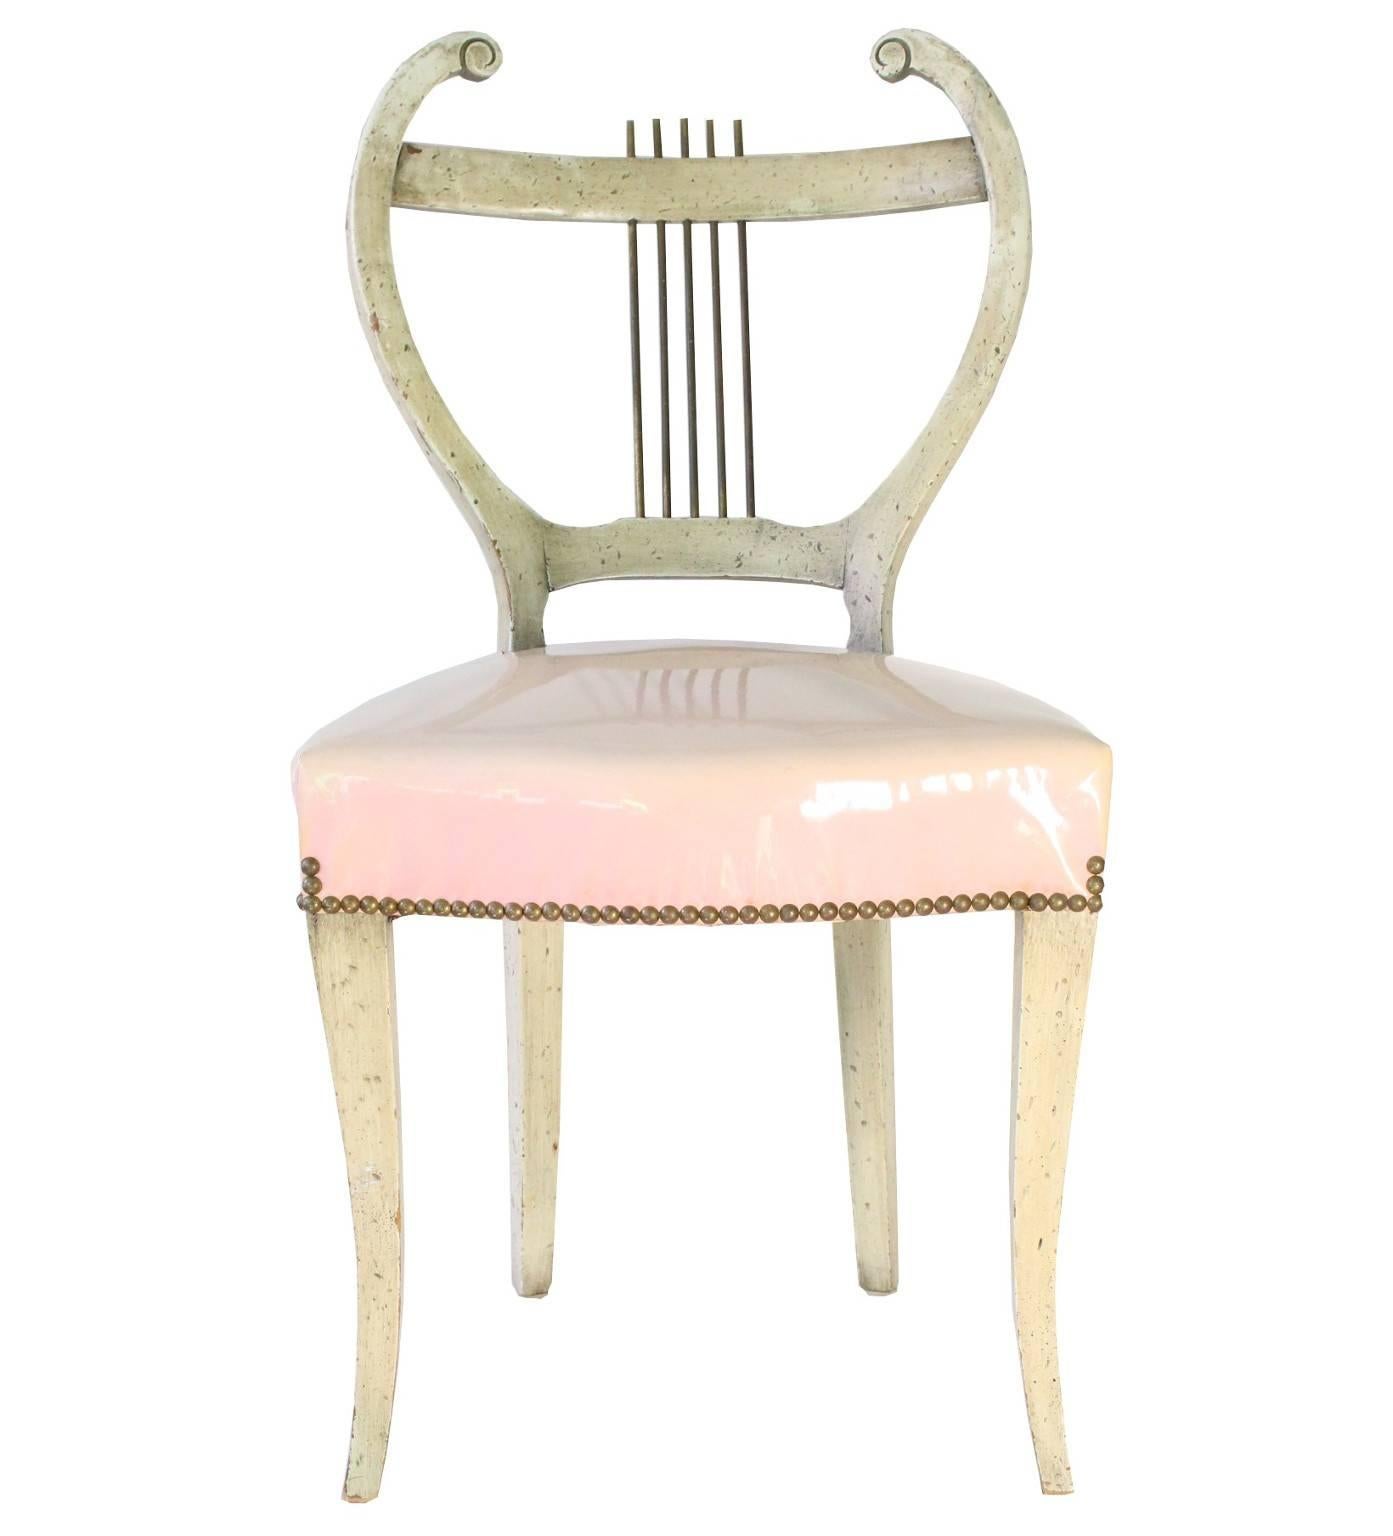 Regency Revival Midcentury Set of Four French Regency Lyre-Back Dining Chairs with Vinyl Seats